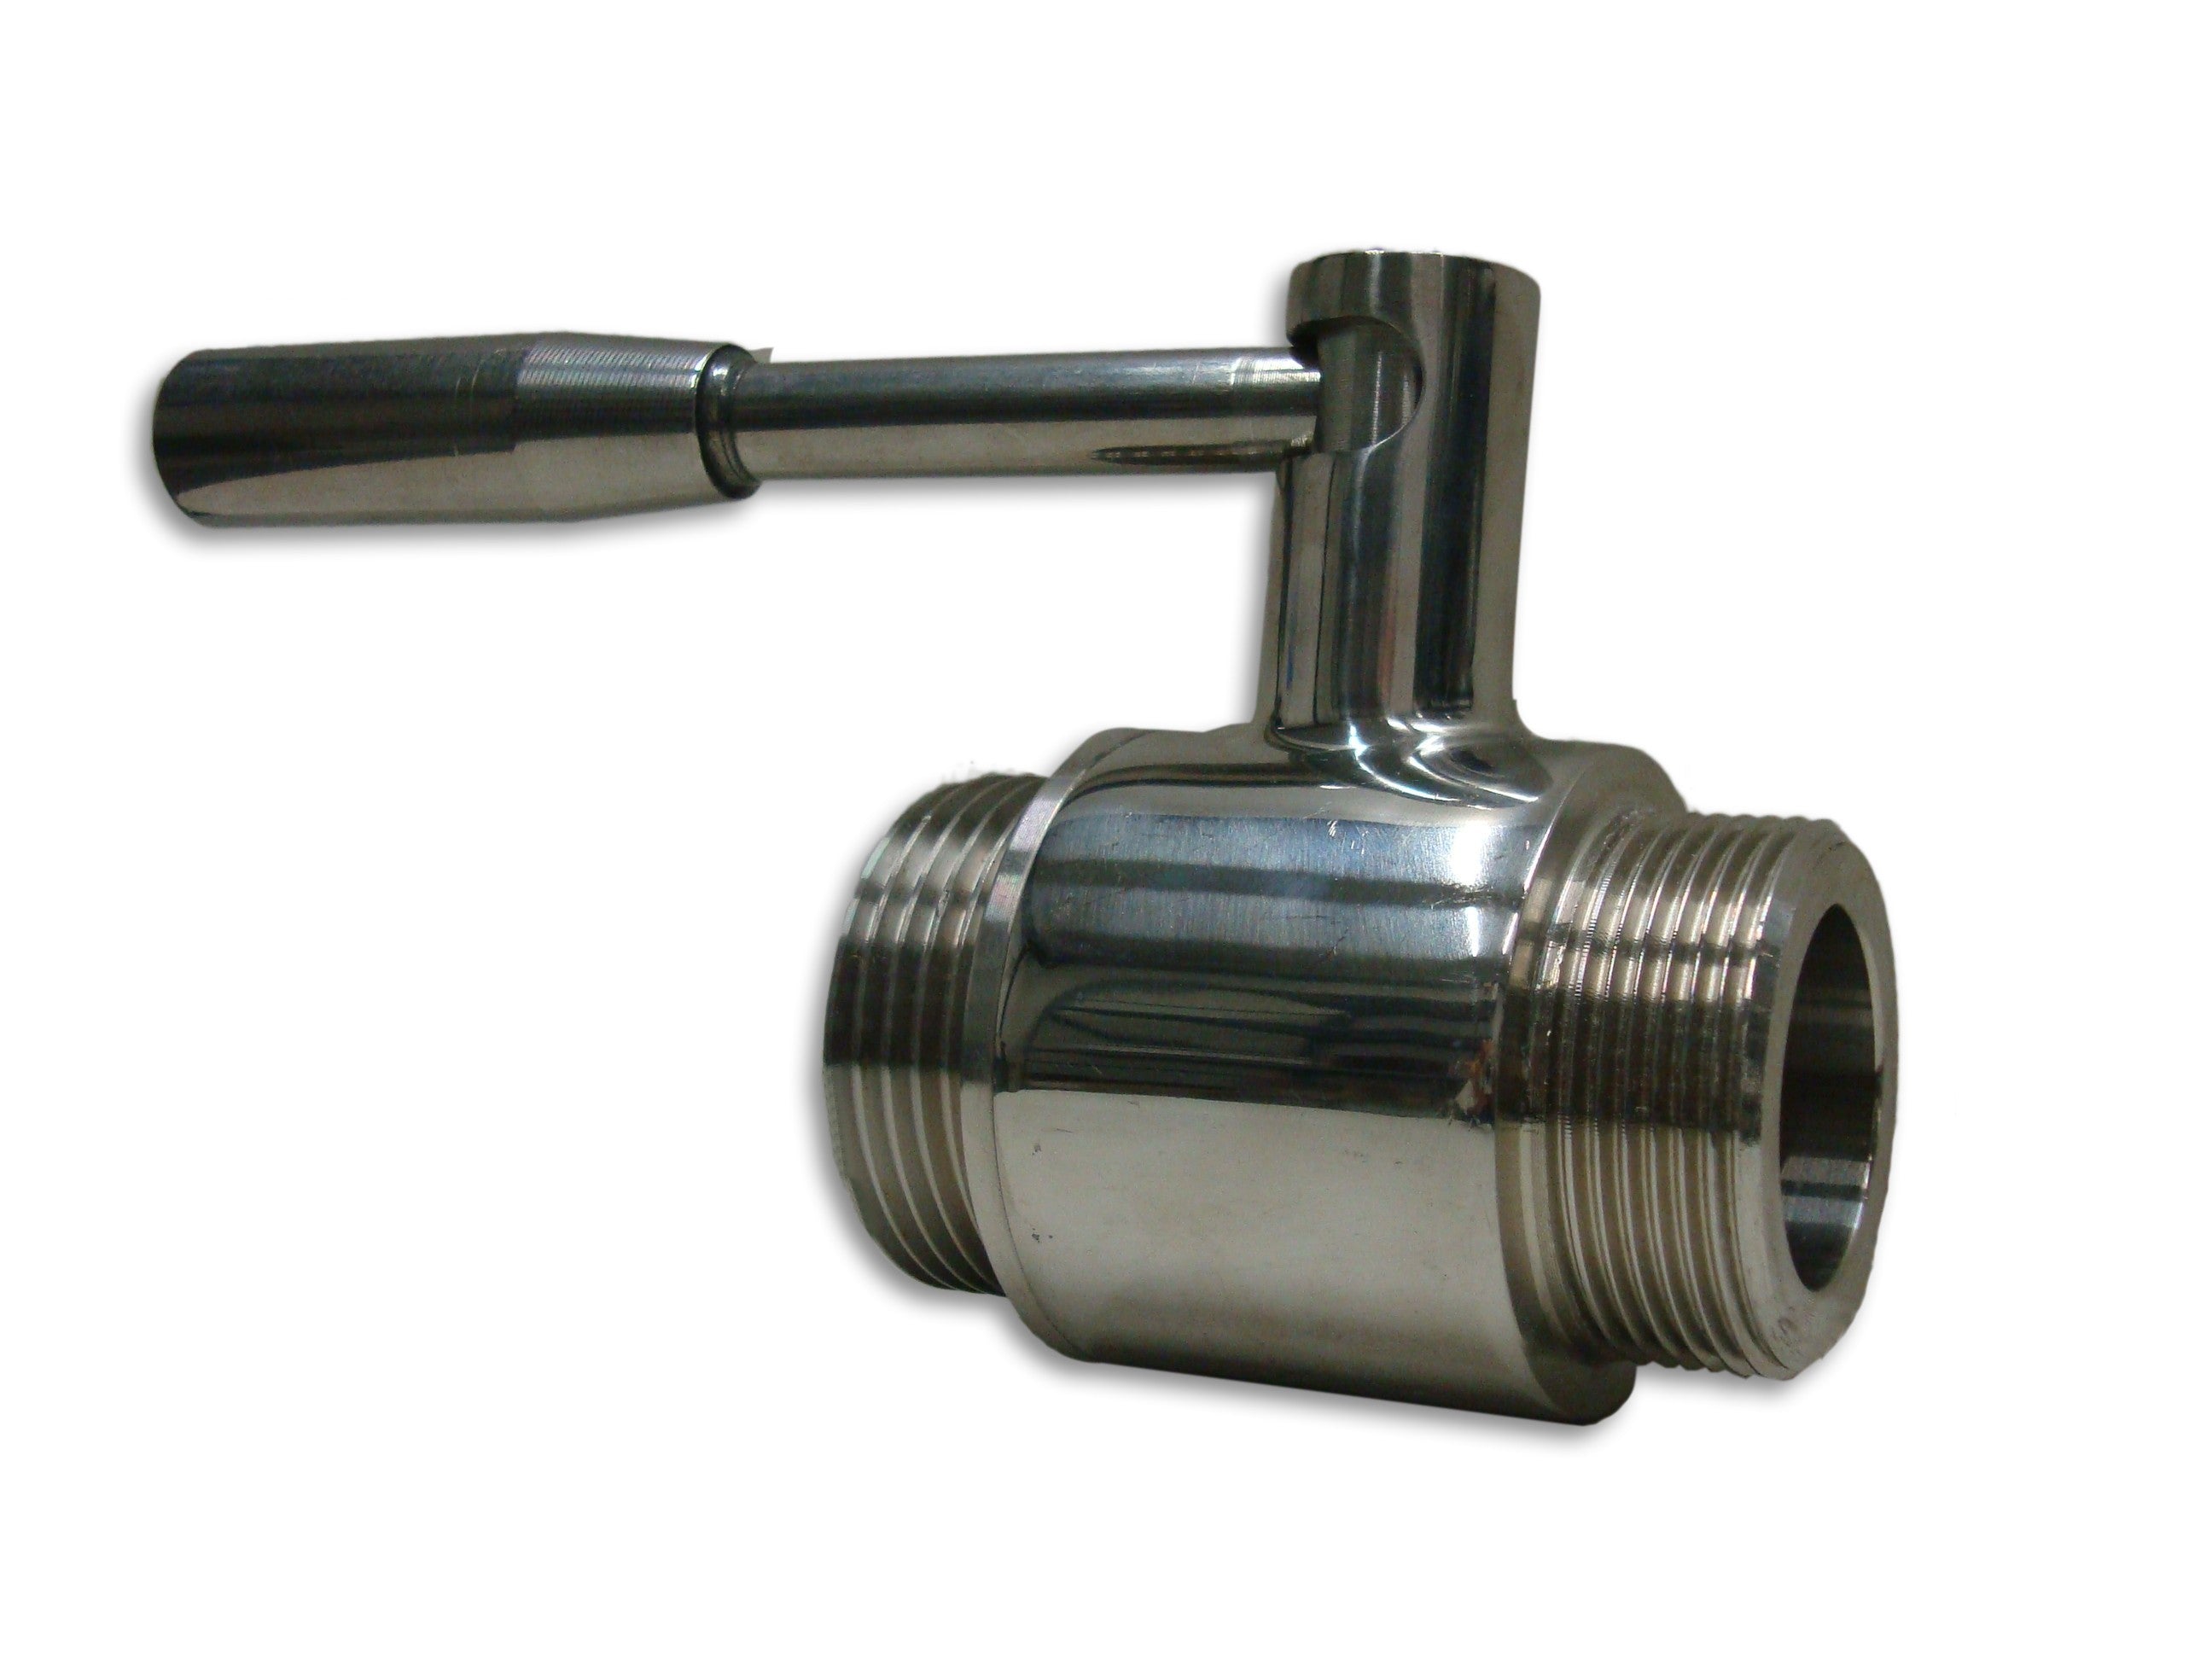 Stainless steel ball valve 1" with enological screw 40